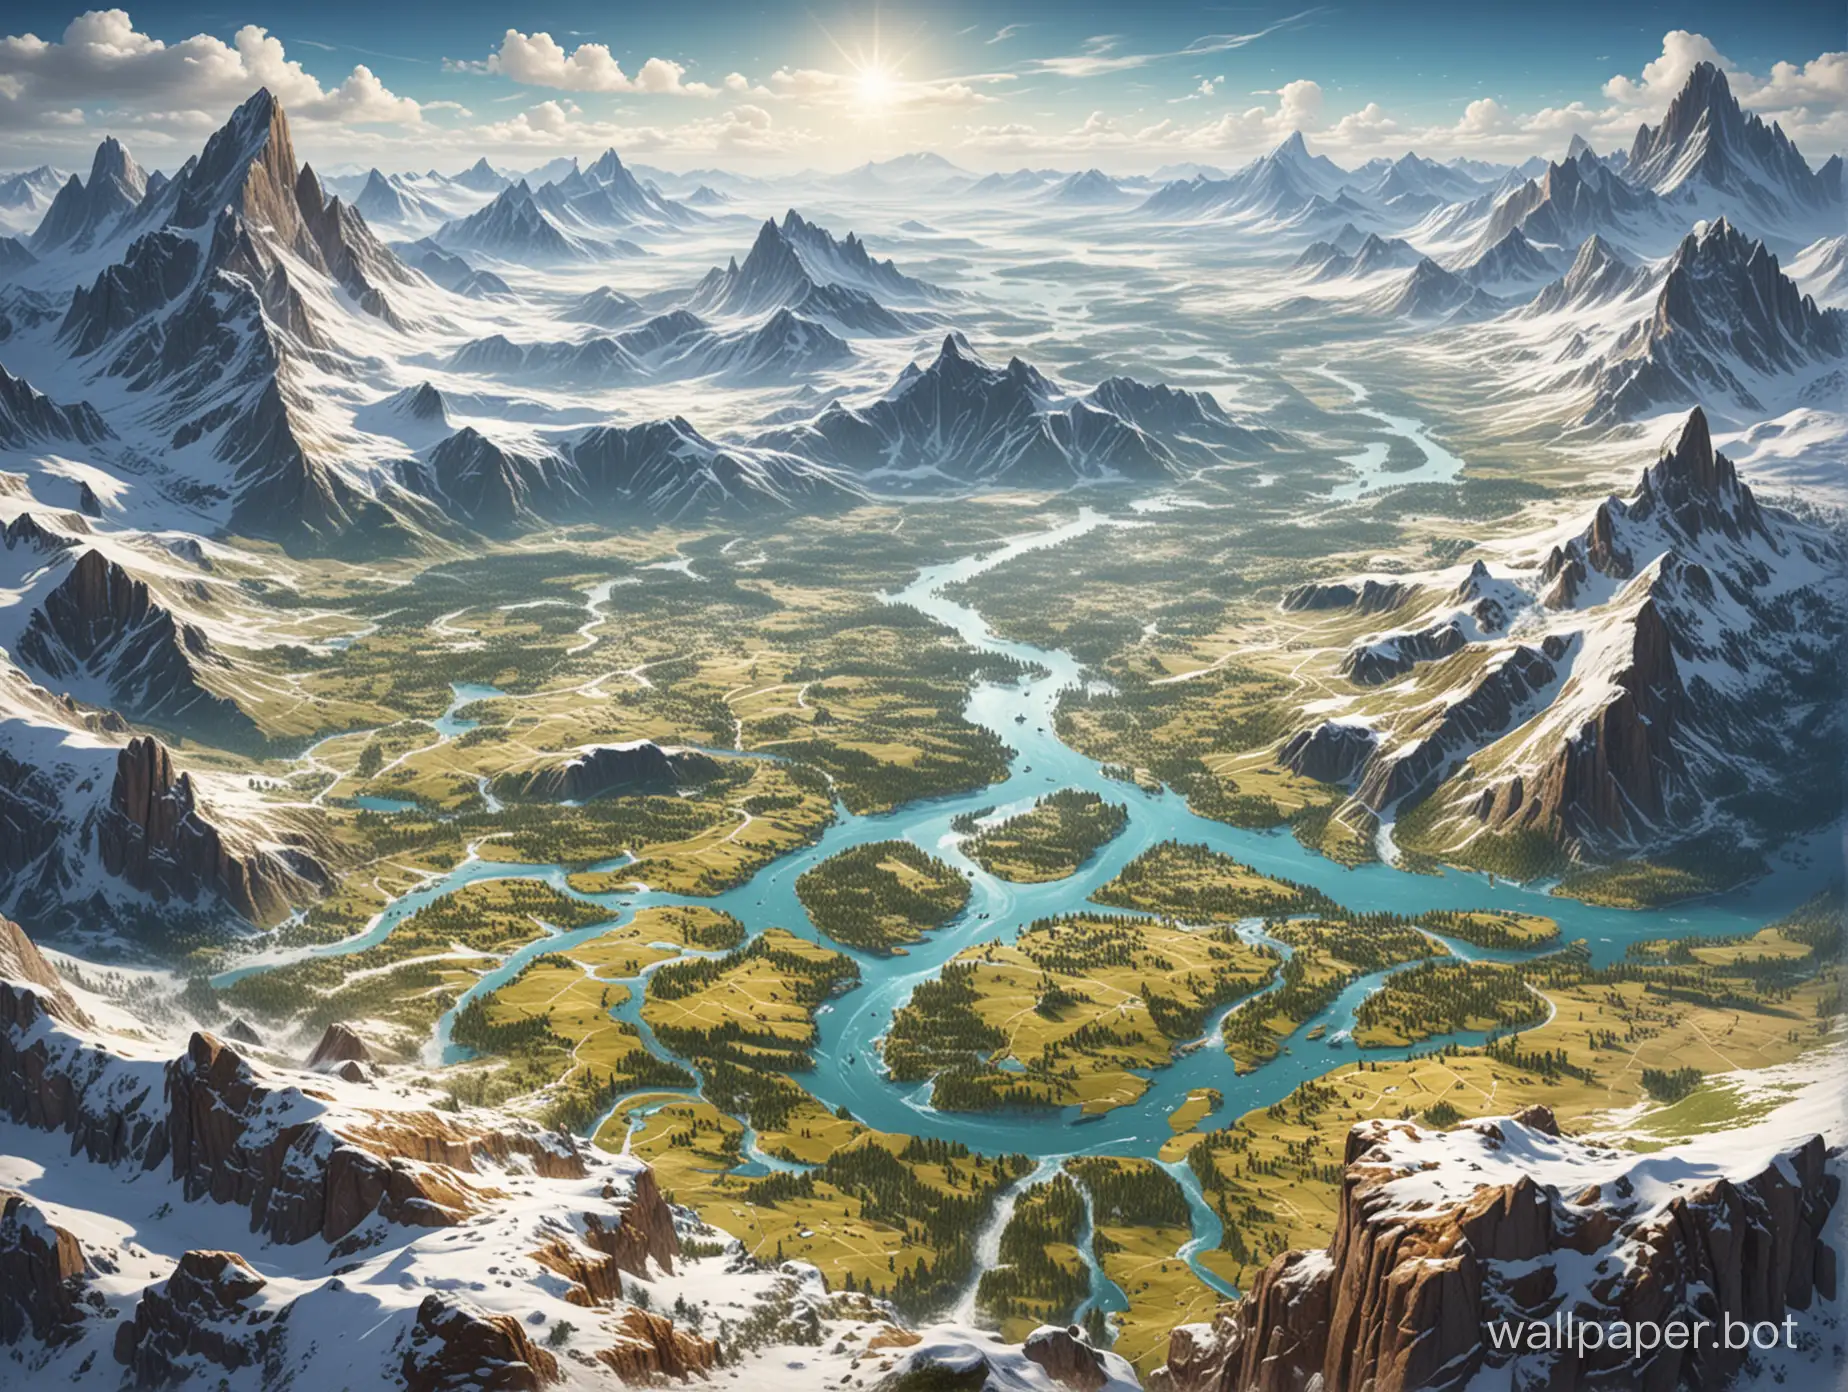 Fantasy world map, top view, various landscapes, top view, snow, forests, mountains, rivers, plains, cities